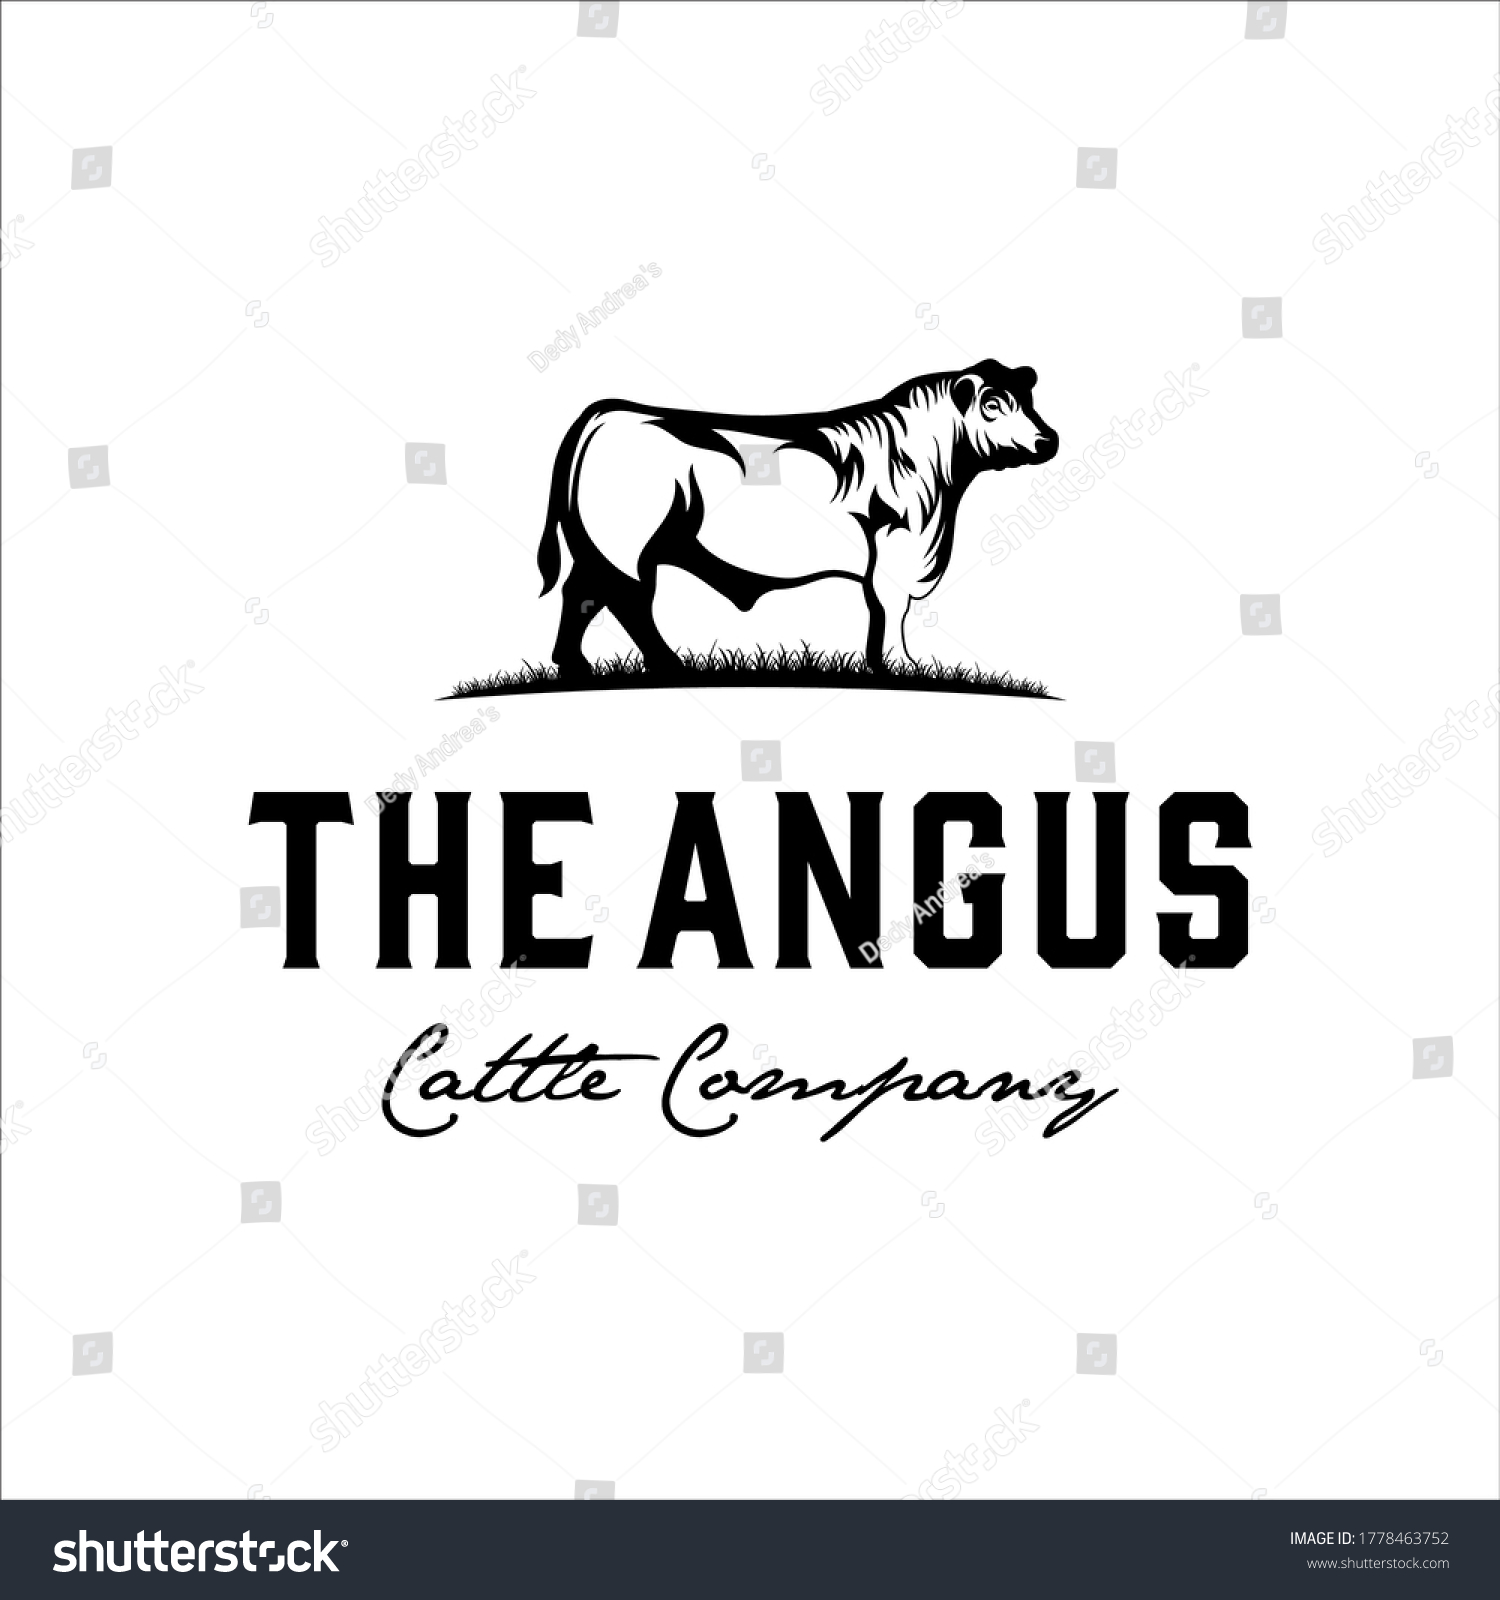 SVG of Angus bull logo design with classic and elegant style svg